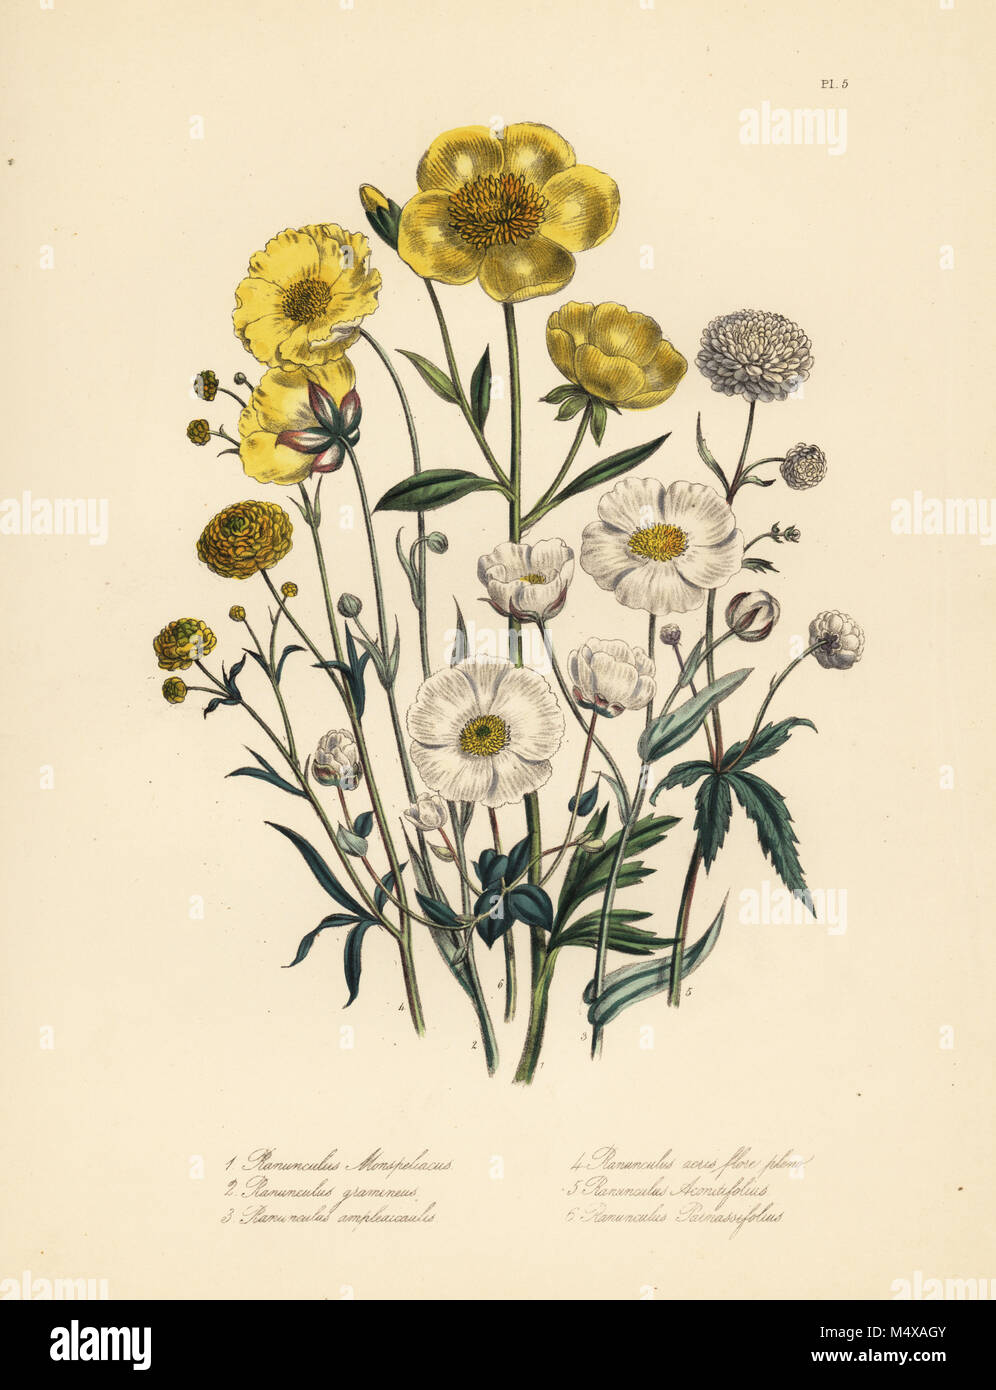 Montpelier crowfoot, Ranunculus monspeliacus, grass-leaved crowfoot, R. gramineus, stem-clasping crowfoot, R. amplexicaulis, acrid crowfoot, R. acris flore pleno, palmate-leaved crowfoot, R. aconitifolius, and parnassia-leaved crowfoot, R. parnassifolius. Handfinished chromolithograph by Henry Noel Humphreys after an illustration by Jane Loudon from Mrs. Jane Loudon's Ladies Flower Garden of Ornamental Perennials, William S. Orr, London, 1849. Stock Photo